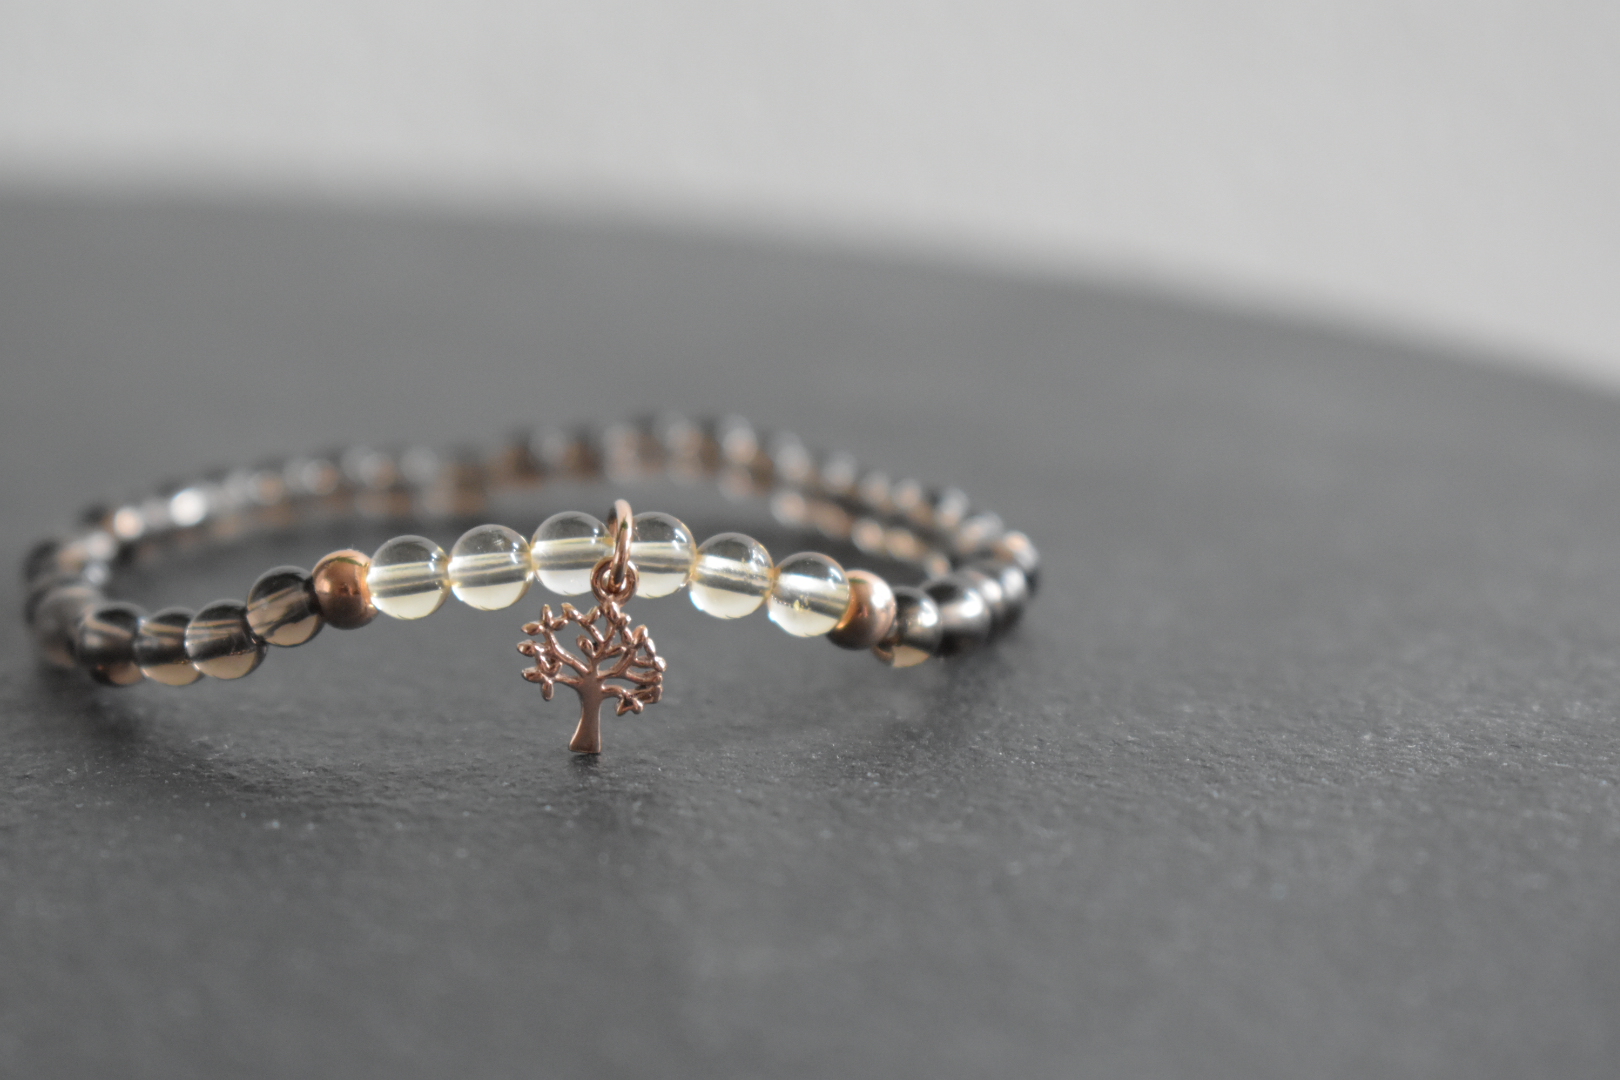 Refreshing combination of smoky quartz and citrine with rose-gold coated tree charm